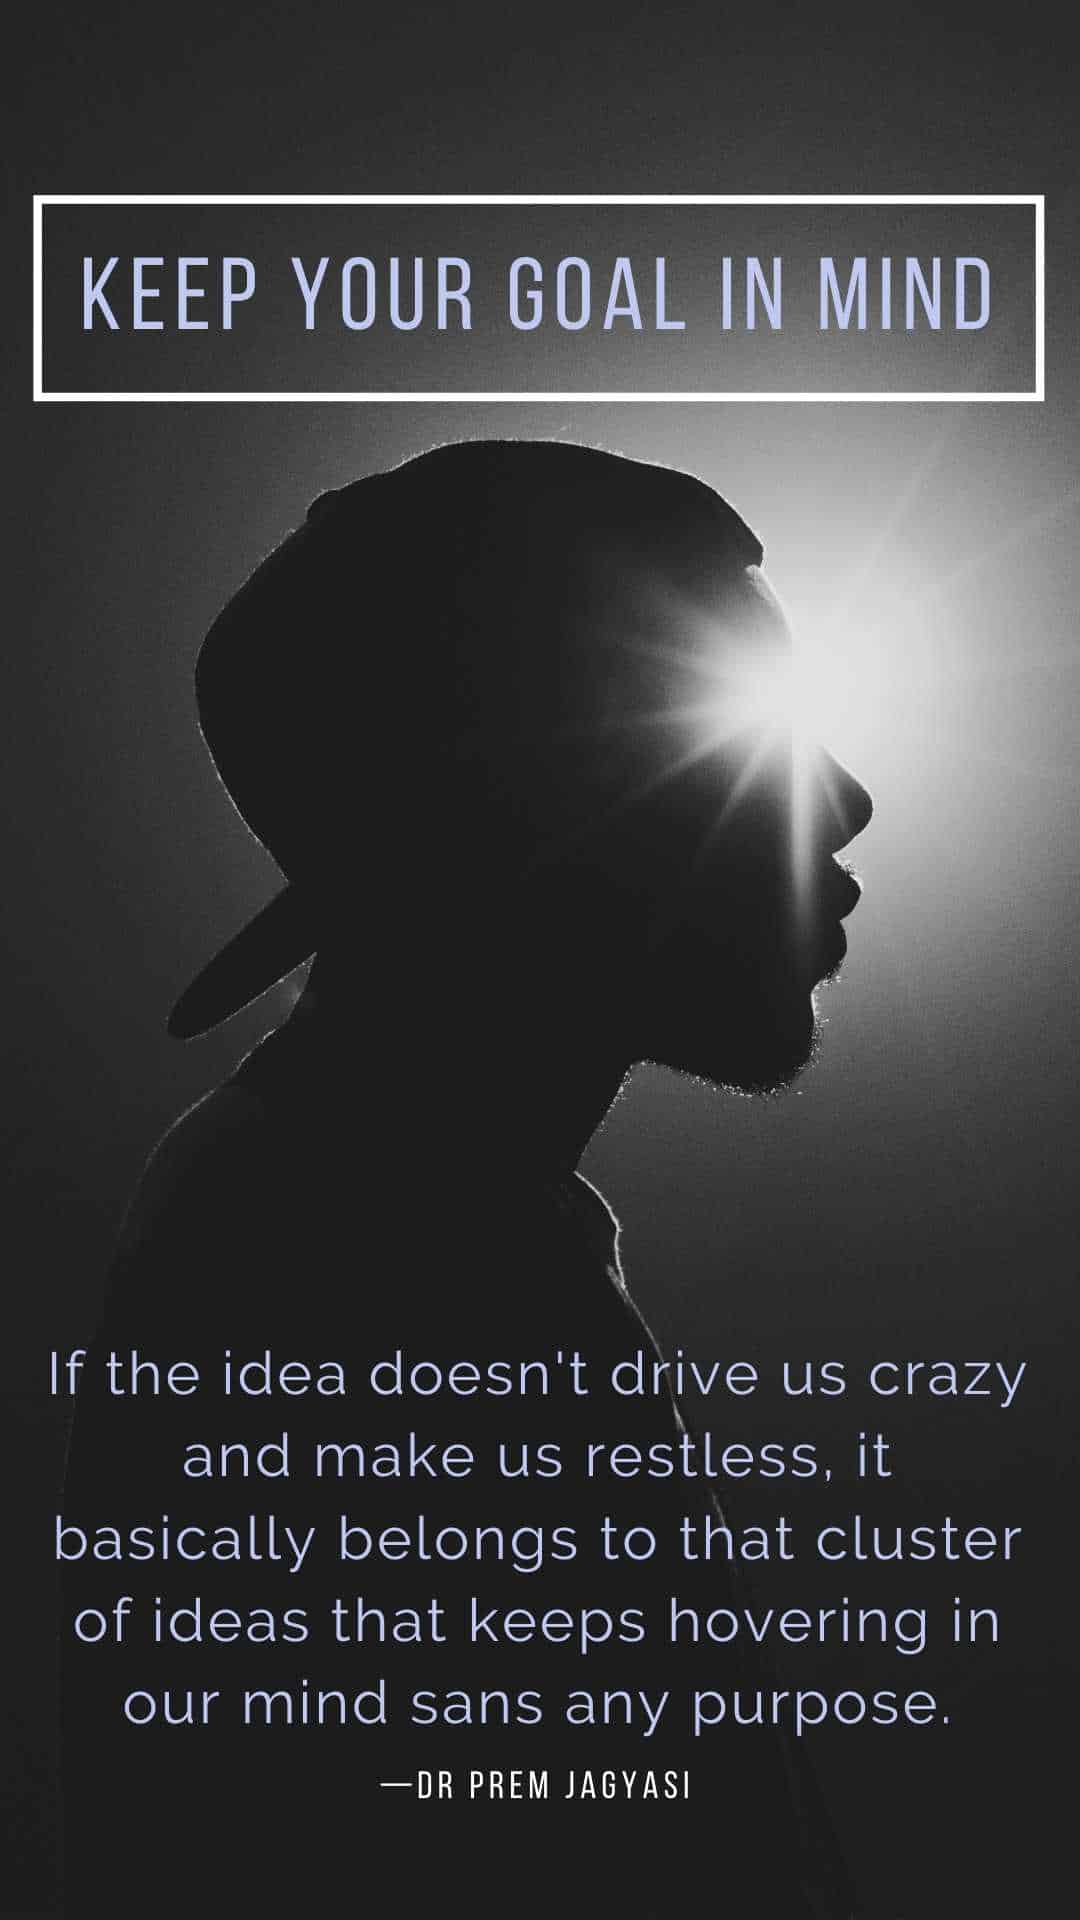 If the idea doesn't drive us crazy and make us restless, it basically belongs to that cluster of ideas that keeps hovering in our mind sans any purpose.